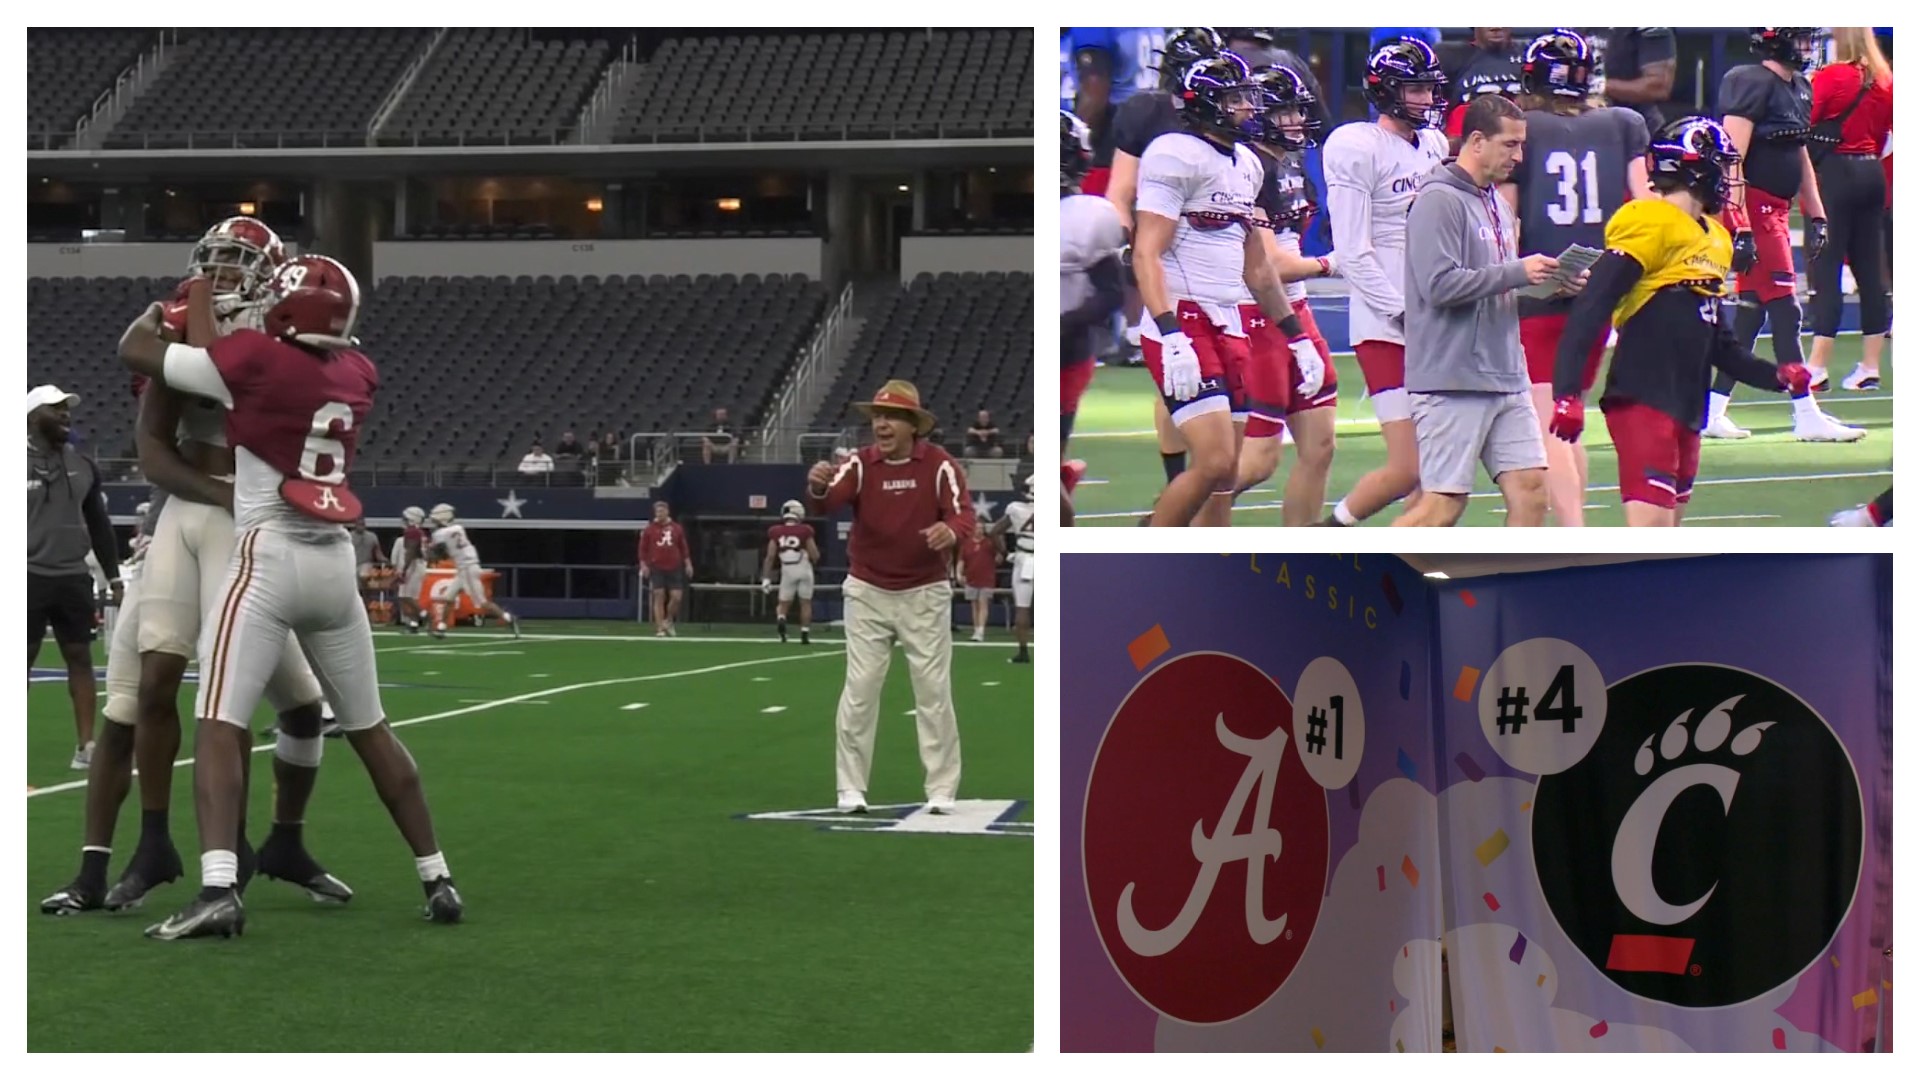 Top-ranked Alabama and Cincinnati have arrived in North Texas for their playoff semifinal game at the Cotton Bowl Classic.